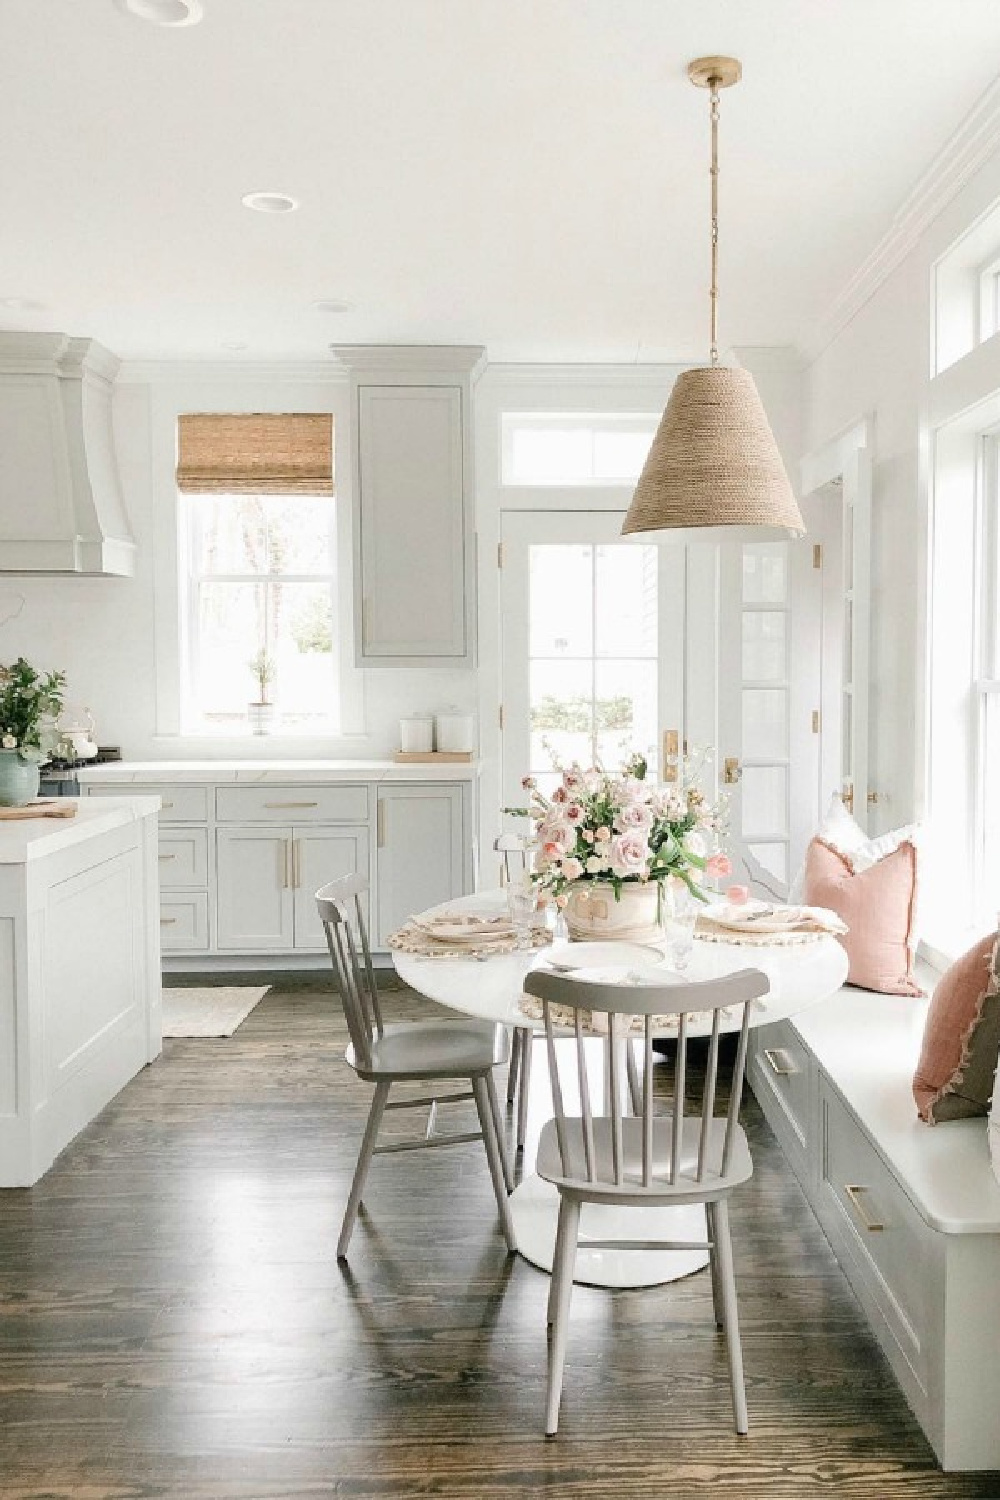 Elegant white farmhouse kitchen with Benjamin Moore Repose Grey cabinets, subway tile, gold accents, and reclaimed barn wood. Design: Finding Lovely.  See more Gorgeous European Country Interior Design Inspiration on Hello Lovely. #europeancountry #frenchfarmhouse #interiordesign